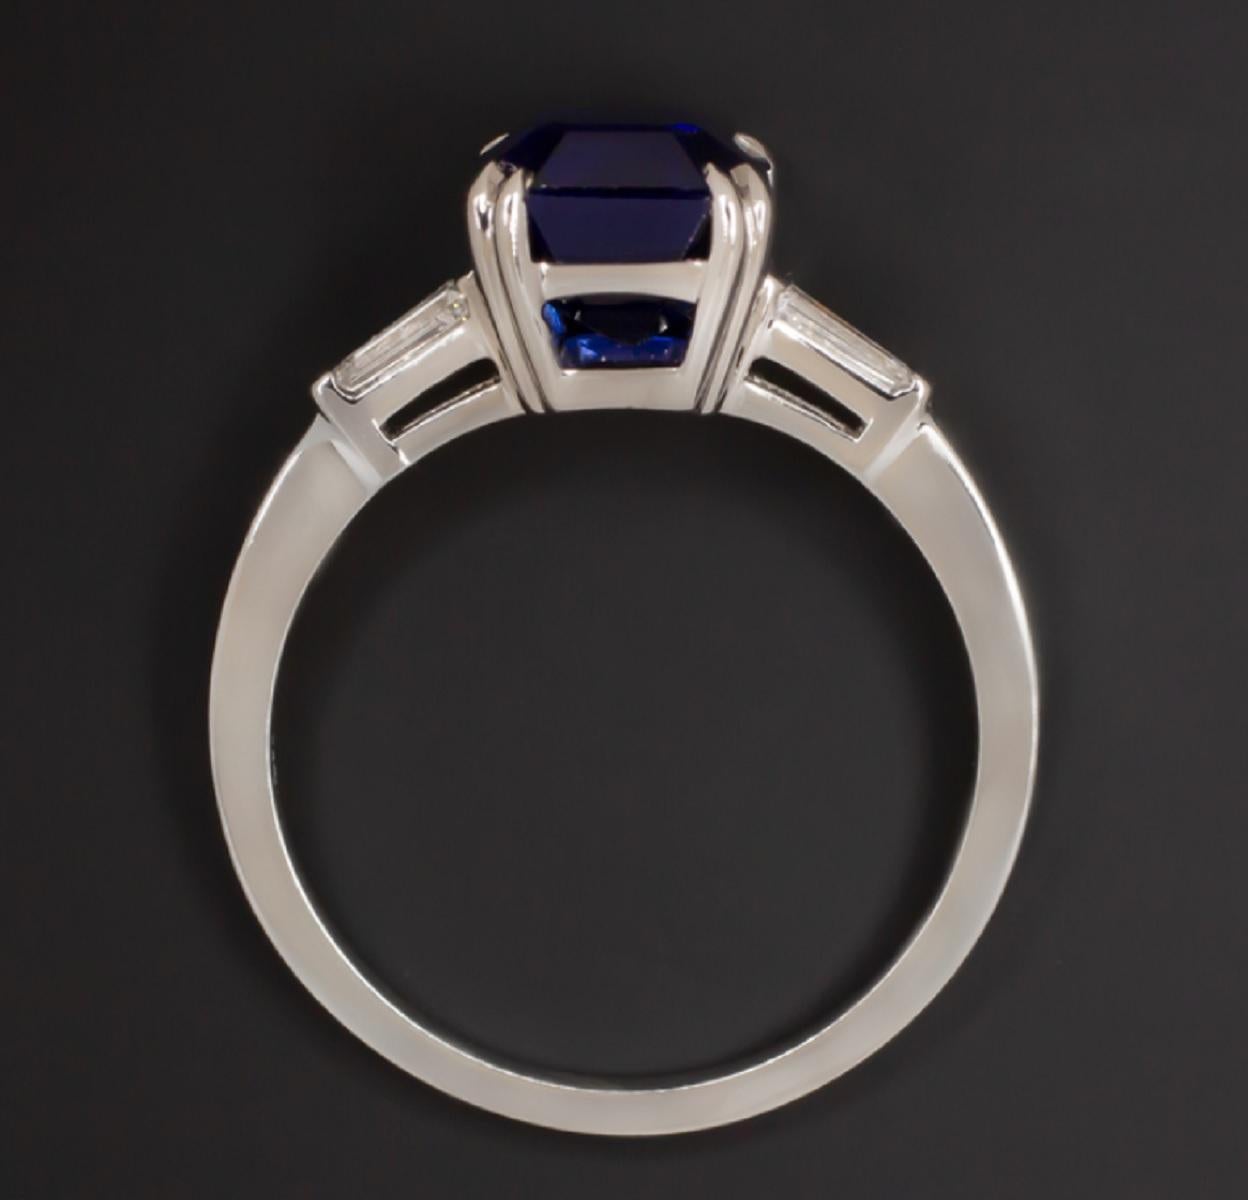 Sophisticated sapphire and diamond ring features a gorgeous emerald cut royal blue sapphire accented by tapered baguette cut diamond accents. The color of the 3.13ct GIA certified sapphire is absolutely stunning with a rich, velvety blue play of